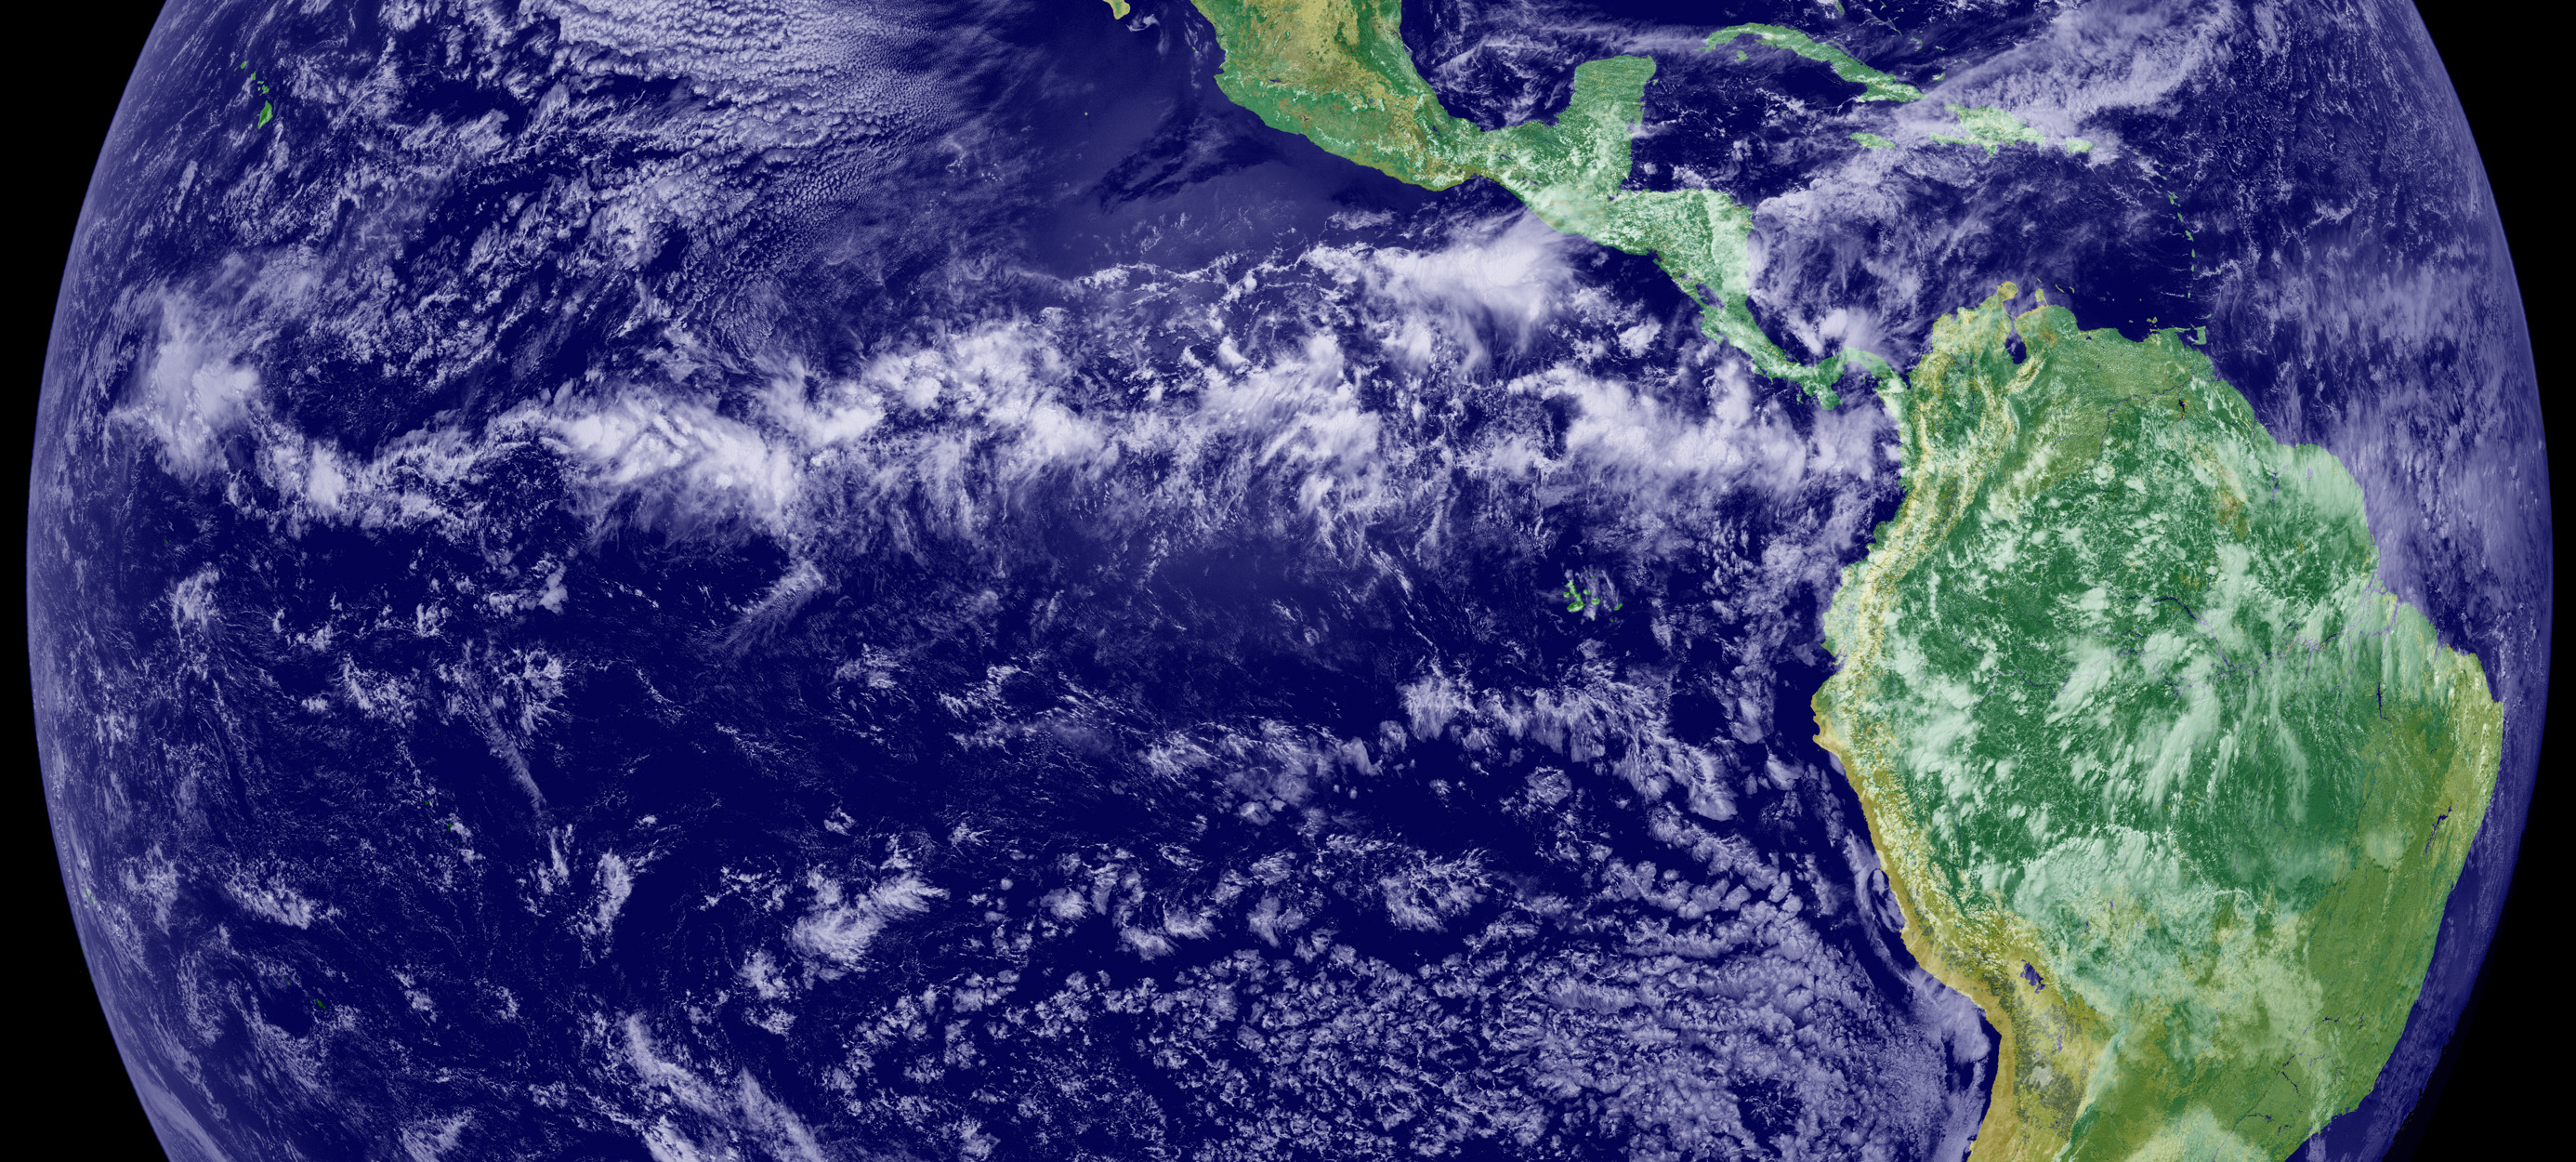 This image is a combination of cloud data from NOAA’s Geostationary Operational Environmental Satellite (GOES-11) and color land cover classification data. The ITCZ is the band of bright white clouds that cuts across the center of the Earth. (Photo: NOAA's GOES Project Science Office)